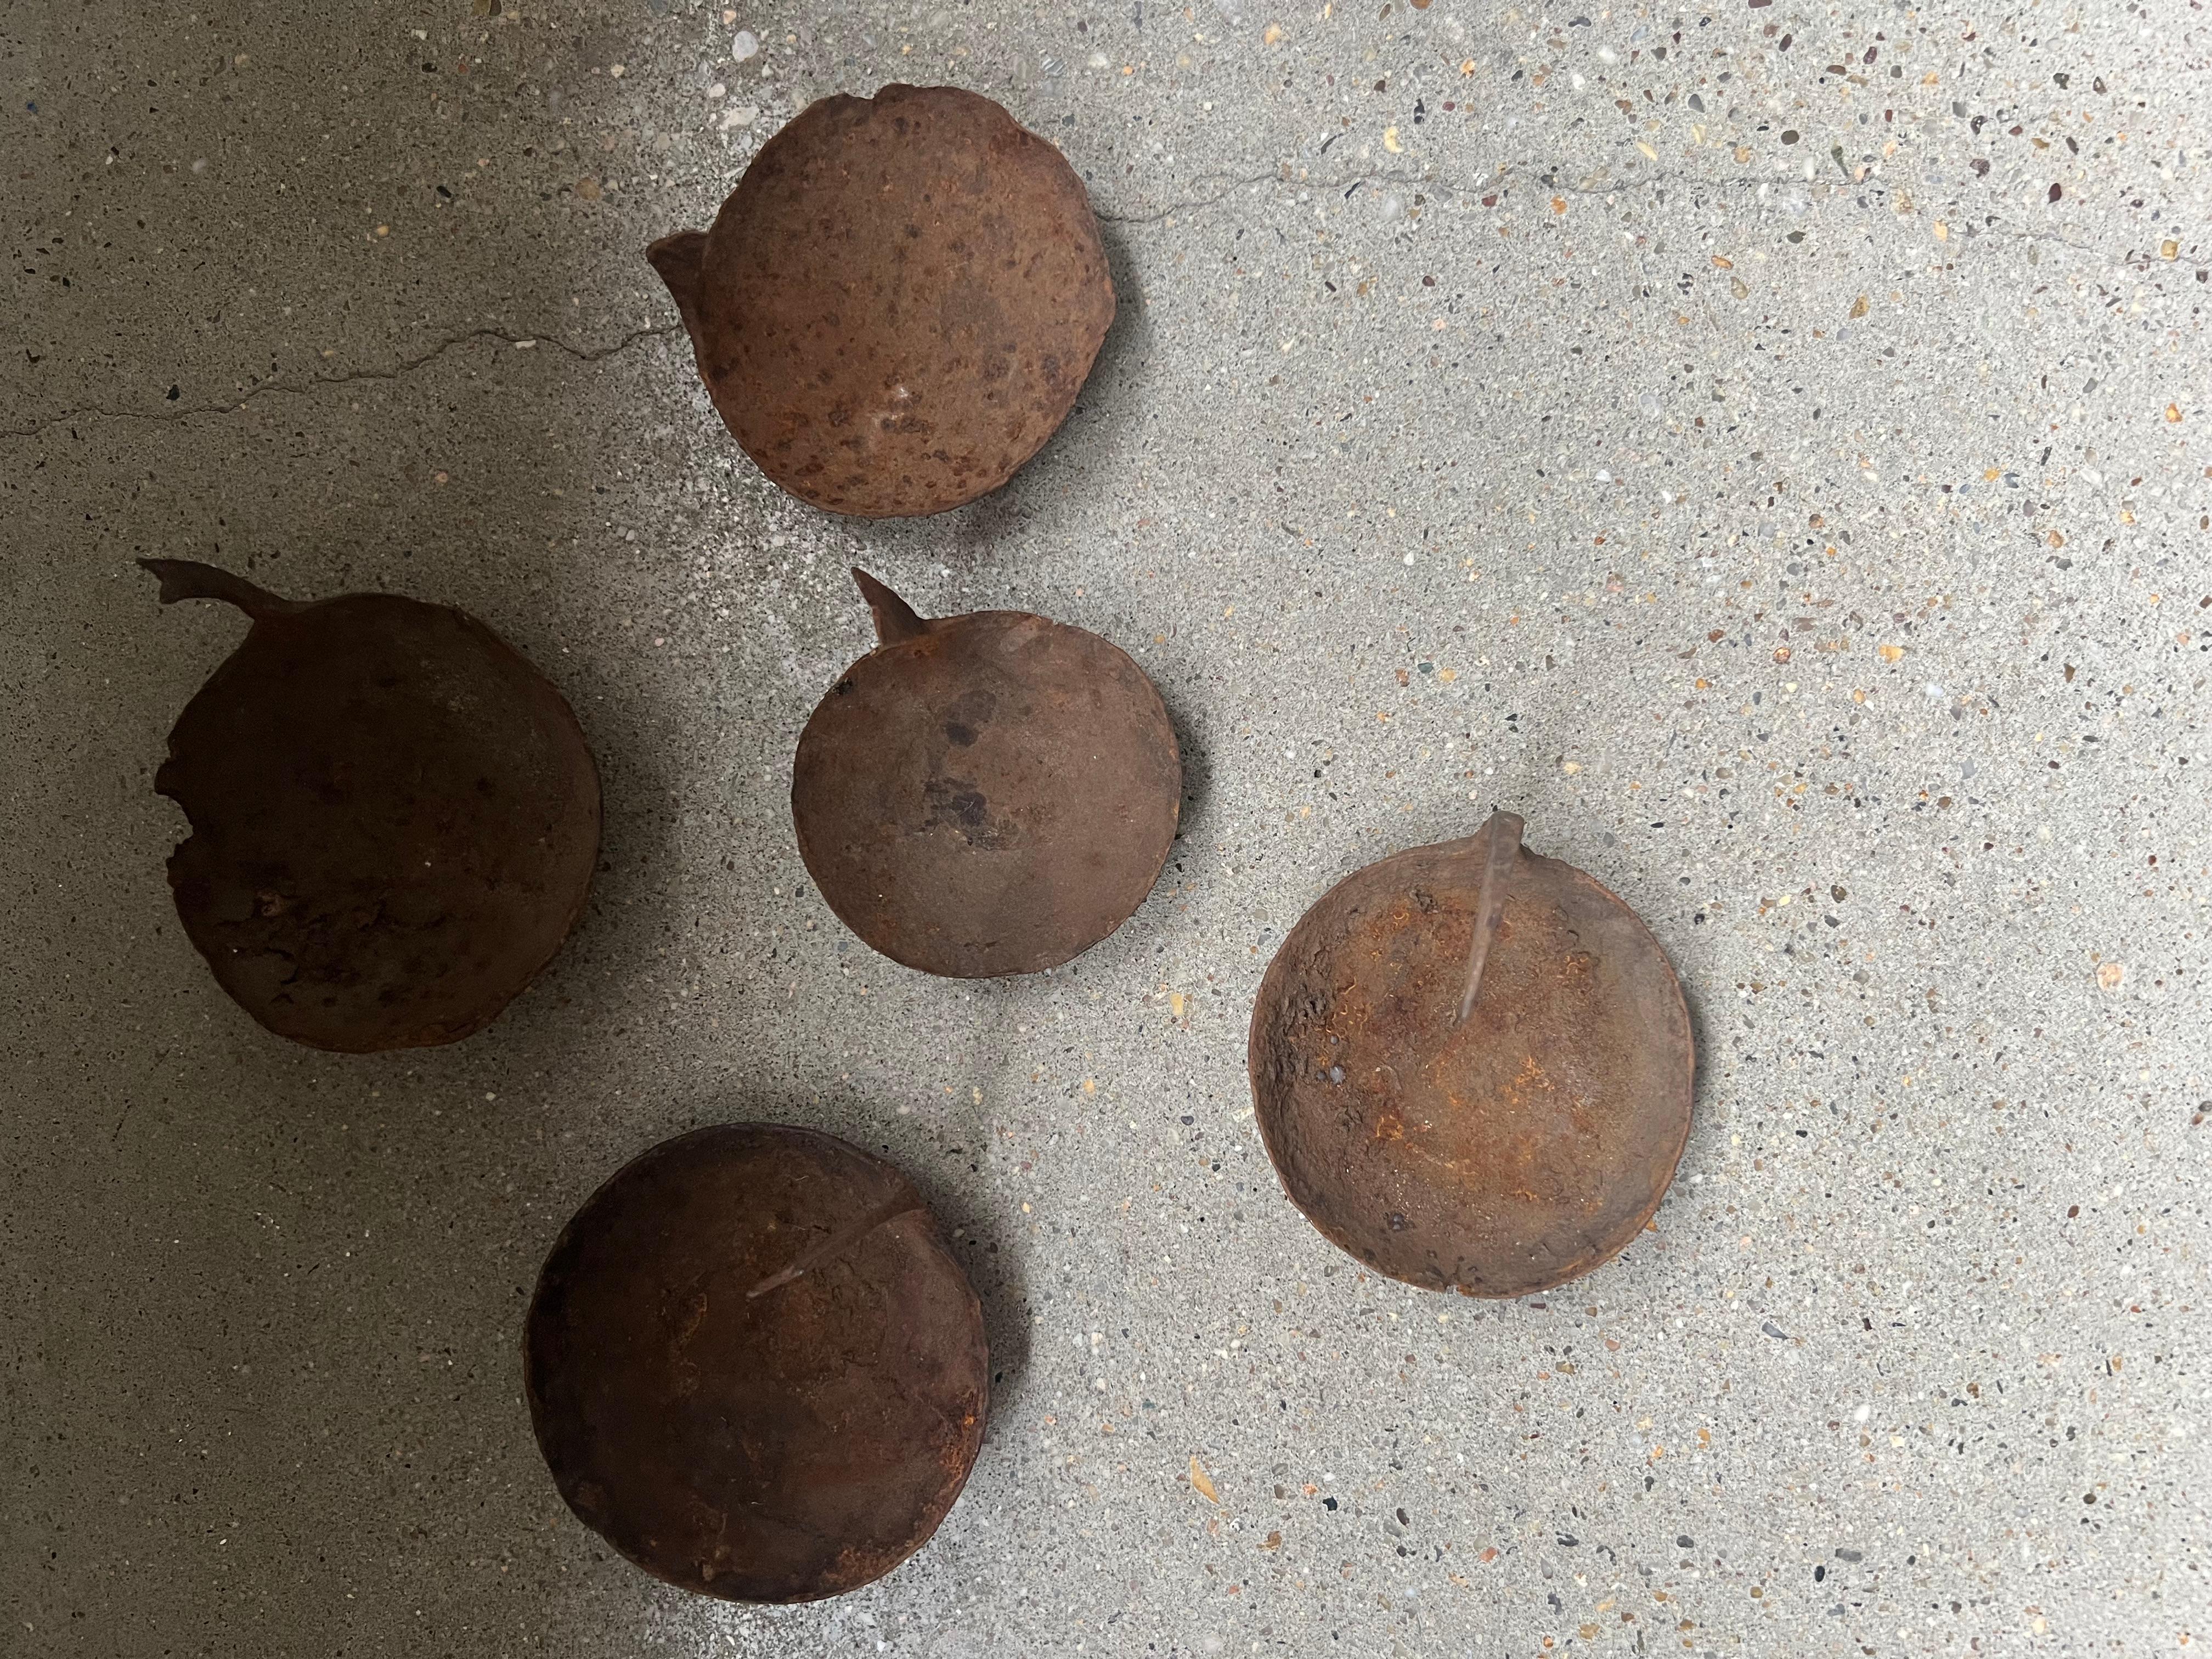 The rust on these oil burners can add character and a sense of age to the collection. The patina tells a story of the wear and tear these burners endured over the years, giving them a weathered and vintage aesthetic.

Collection of 5, ranging in